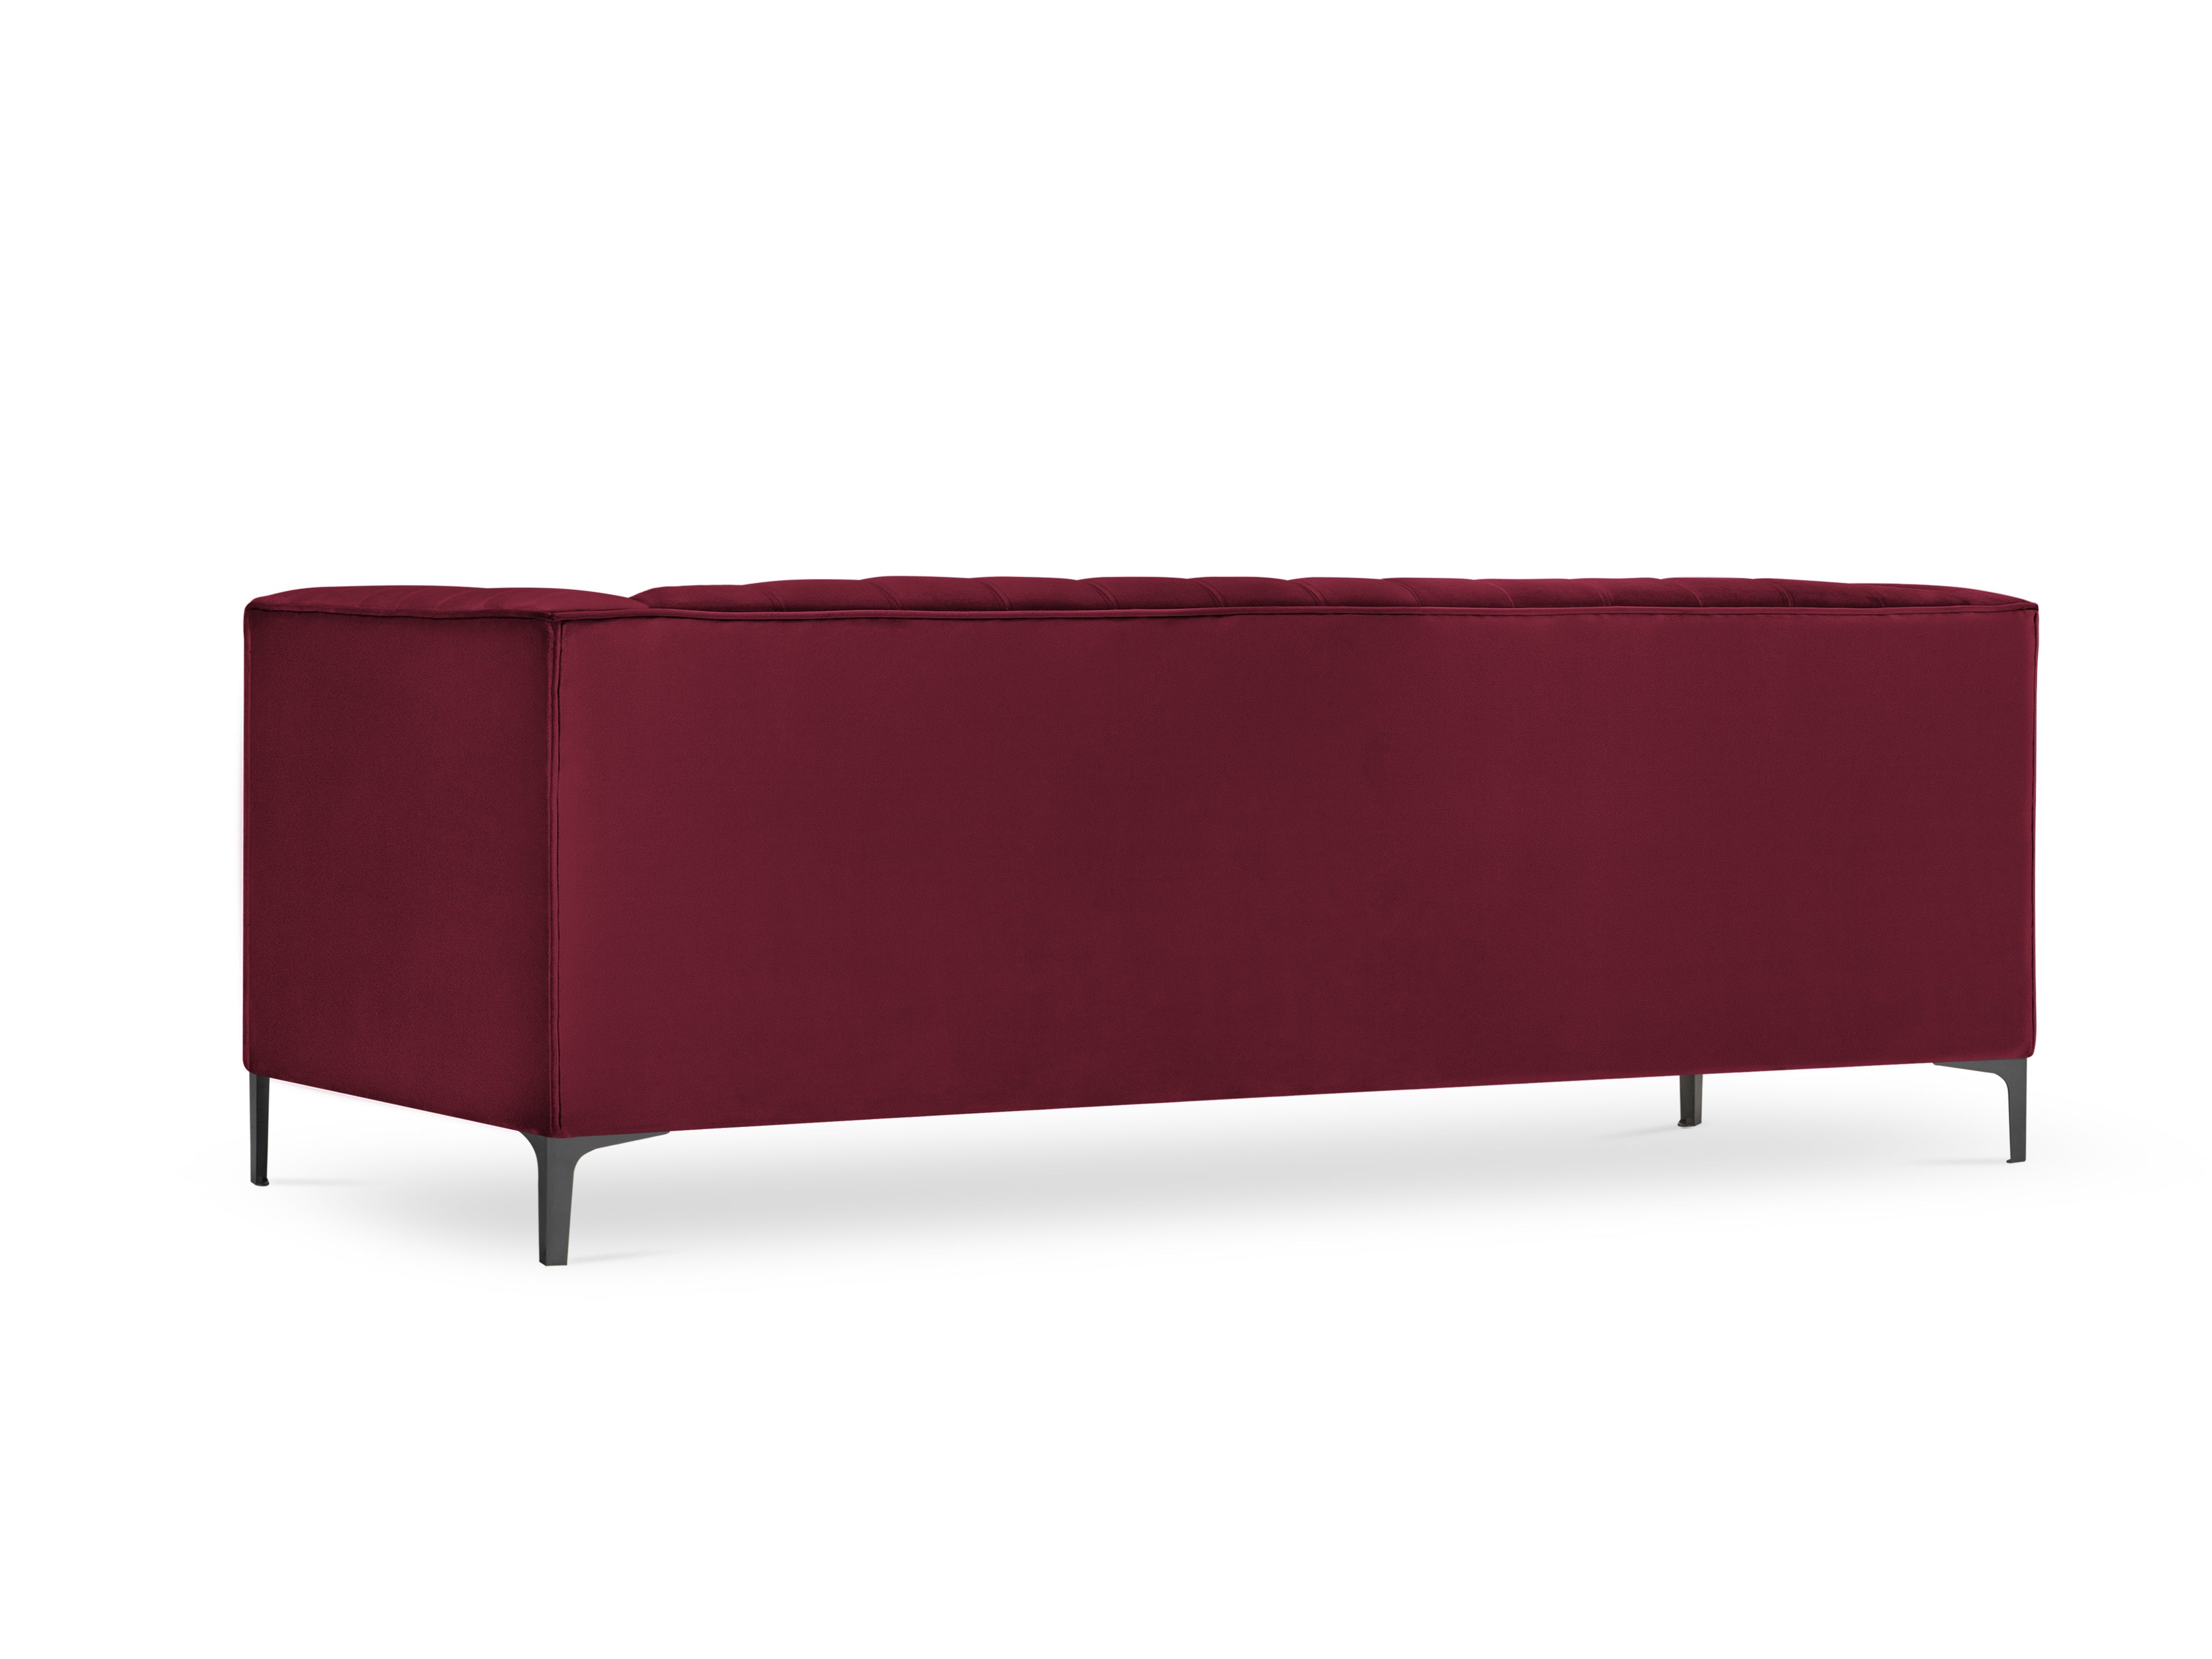 Dark red sofa with a black base